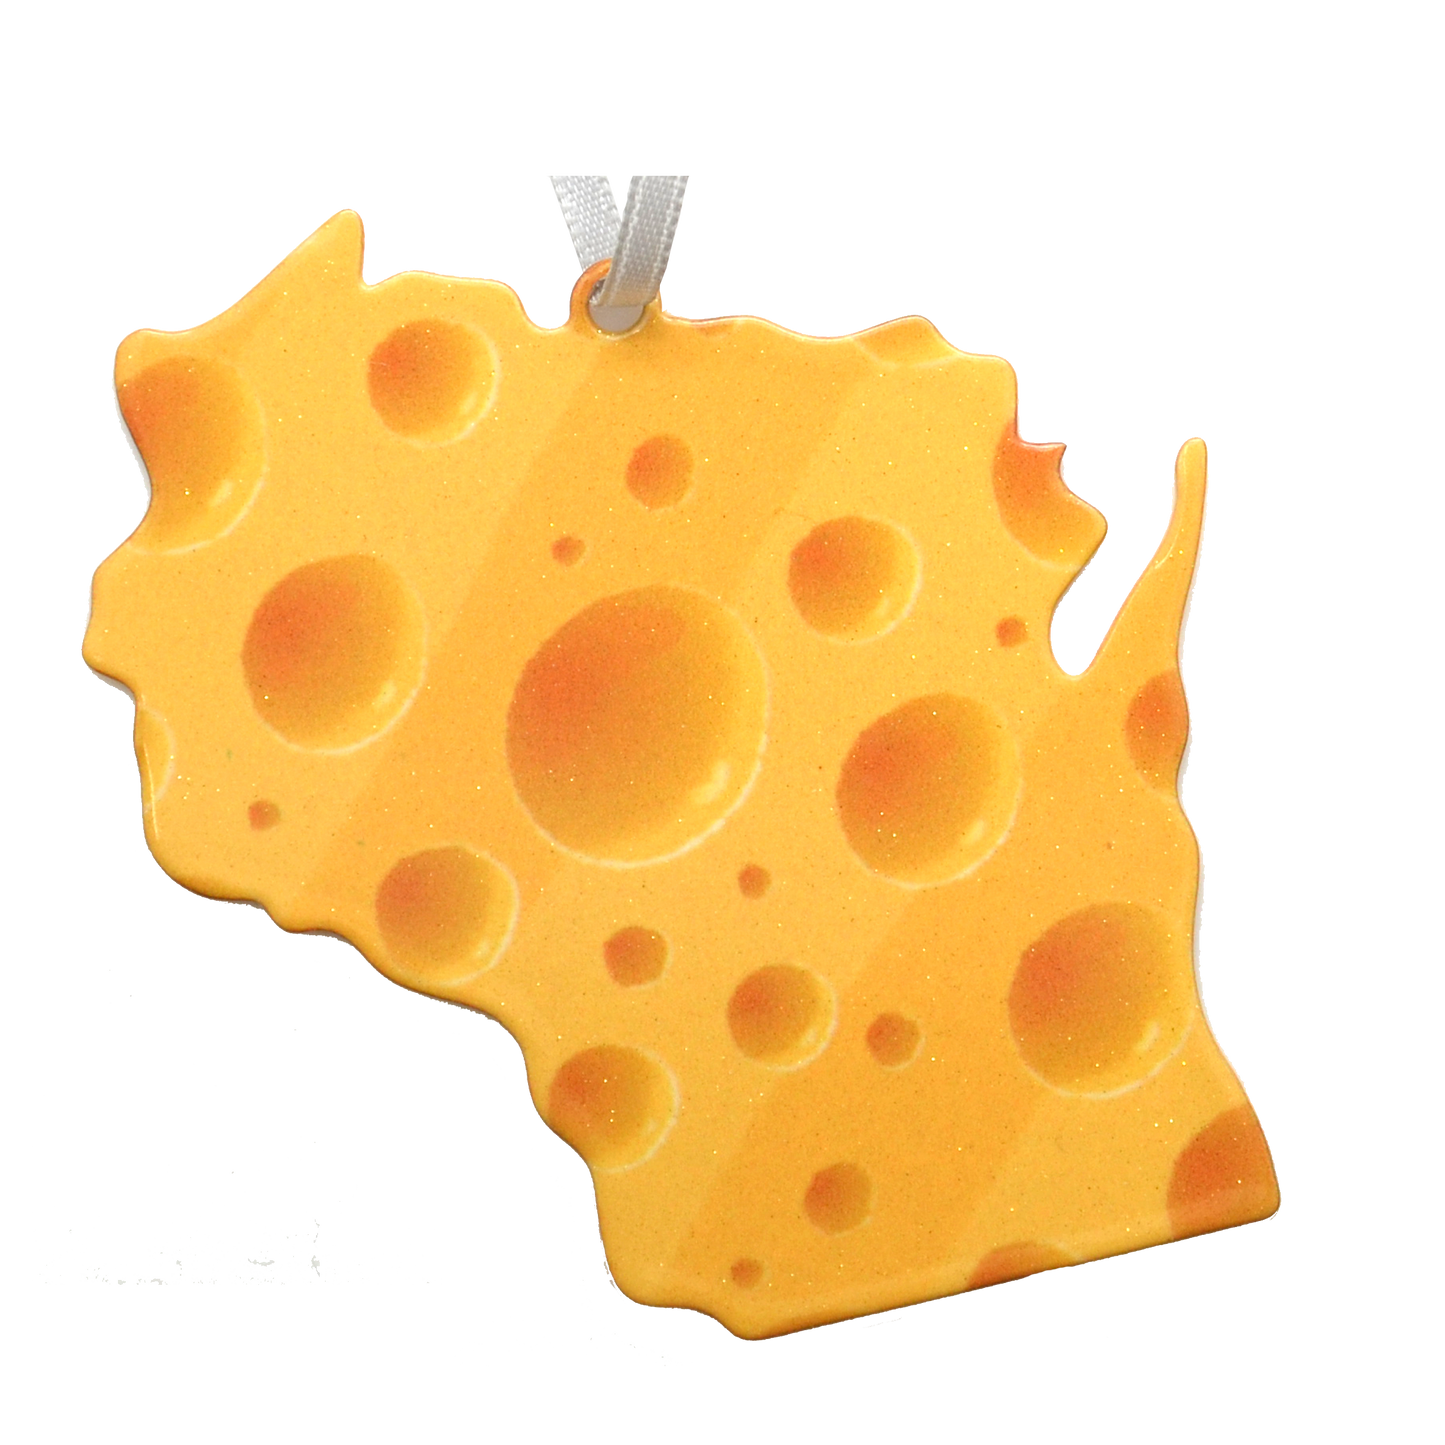 WI State Cheese 2 1/2 or 3 1/2 inch ornament